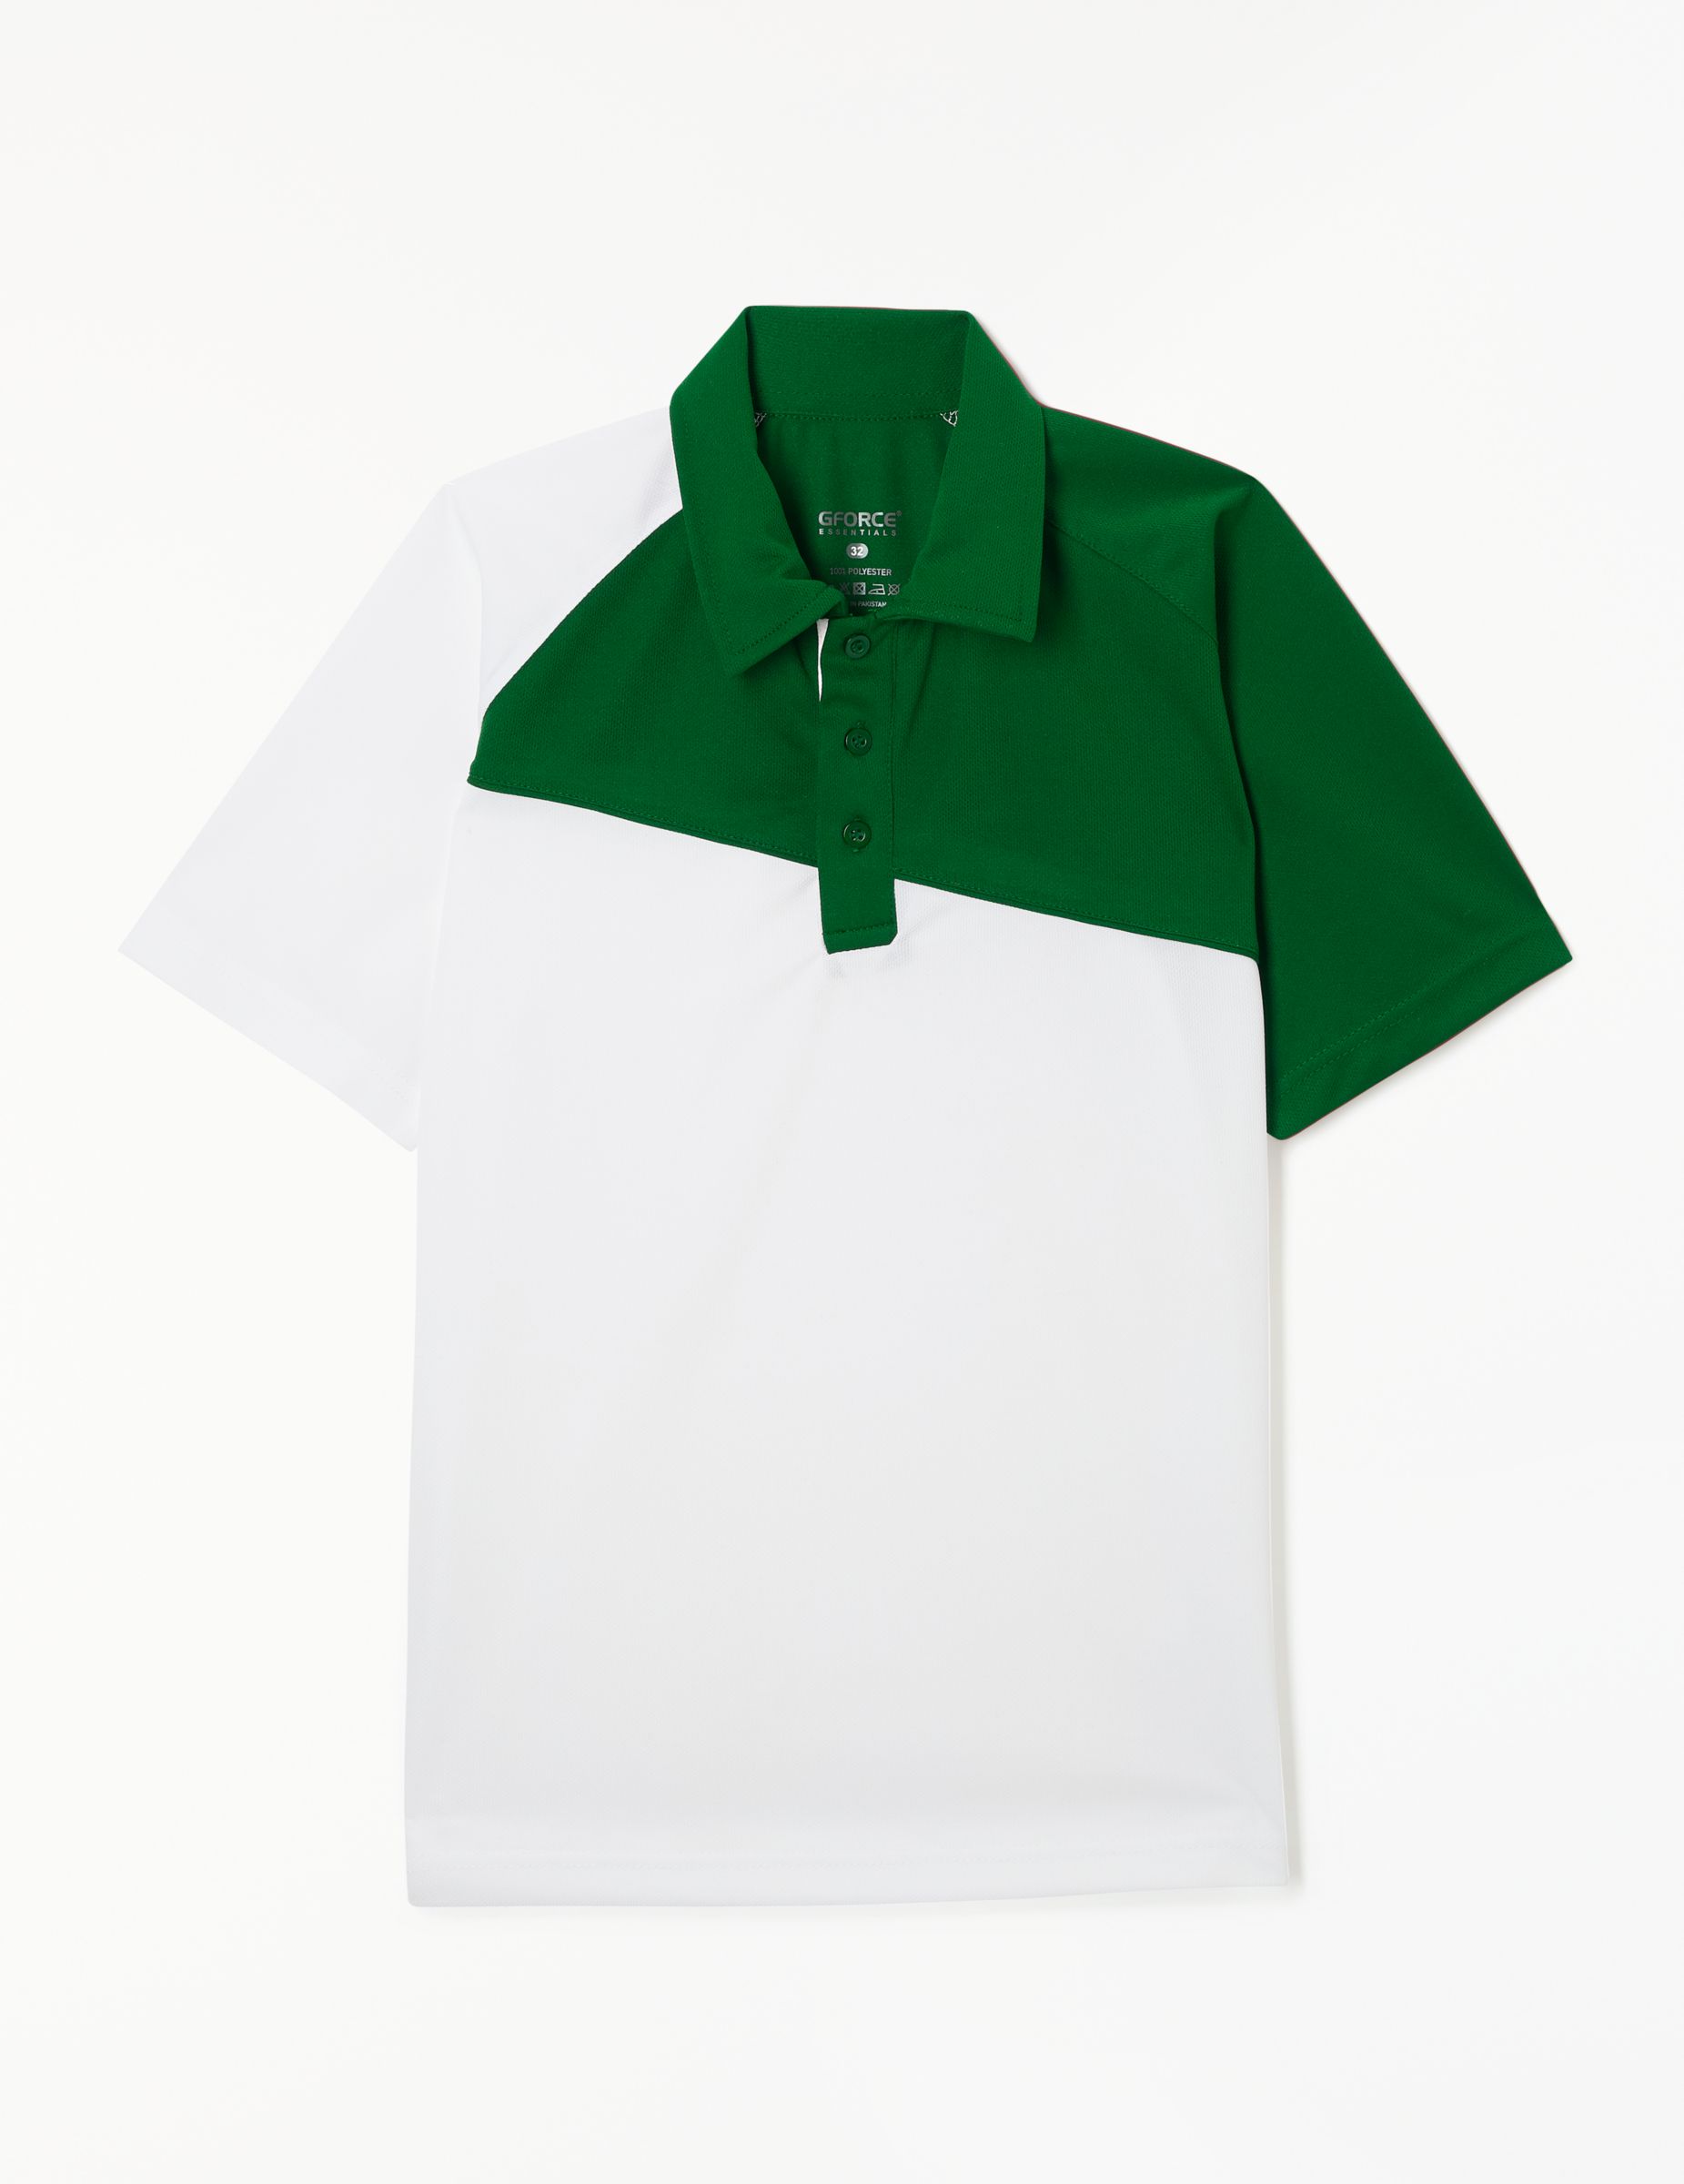 Chigwell School Caswalls' House Polo Shirt, White with Green Panel ...